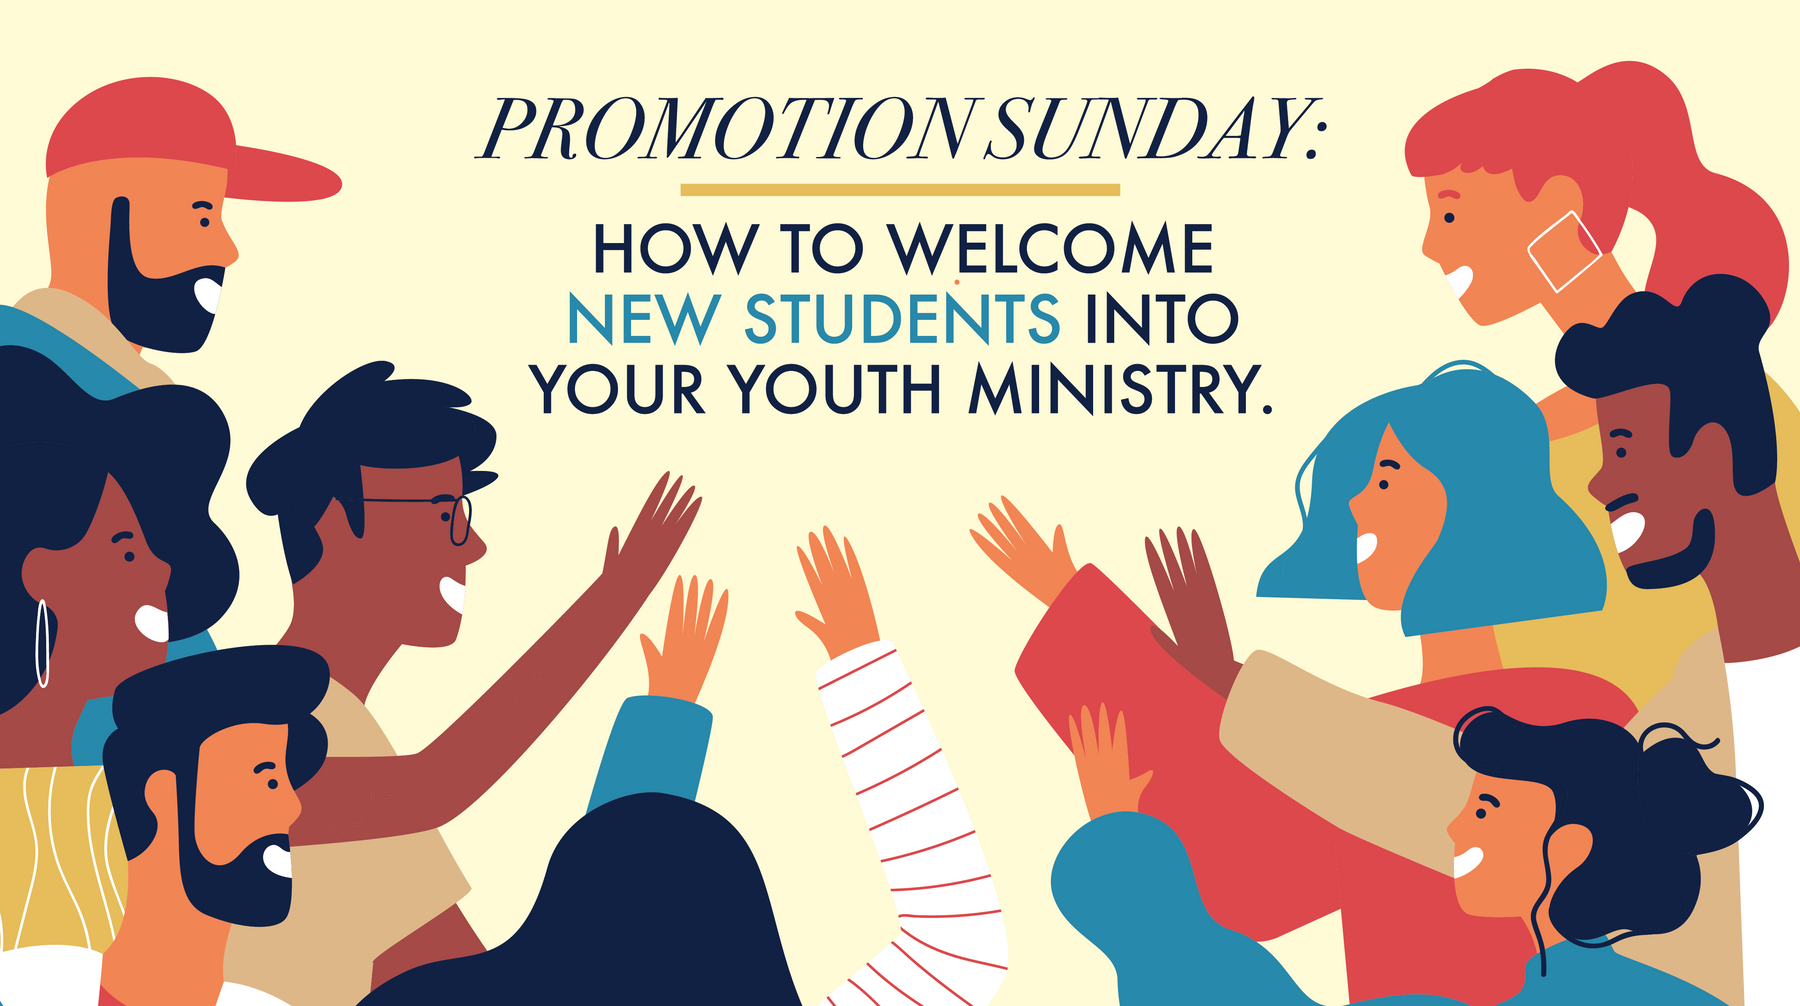 PROMOTION SUNDAY: How to Welcome New Students into Your Youth Ministry